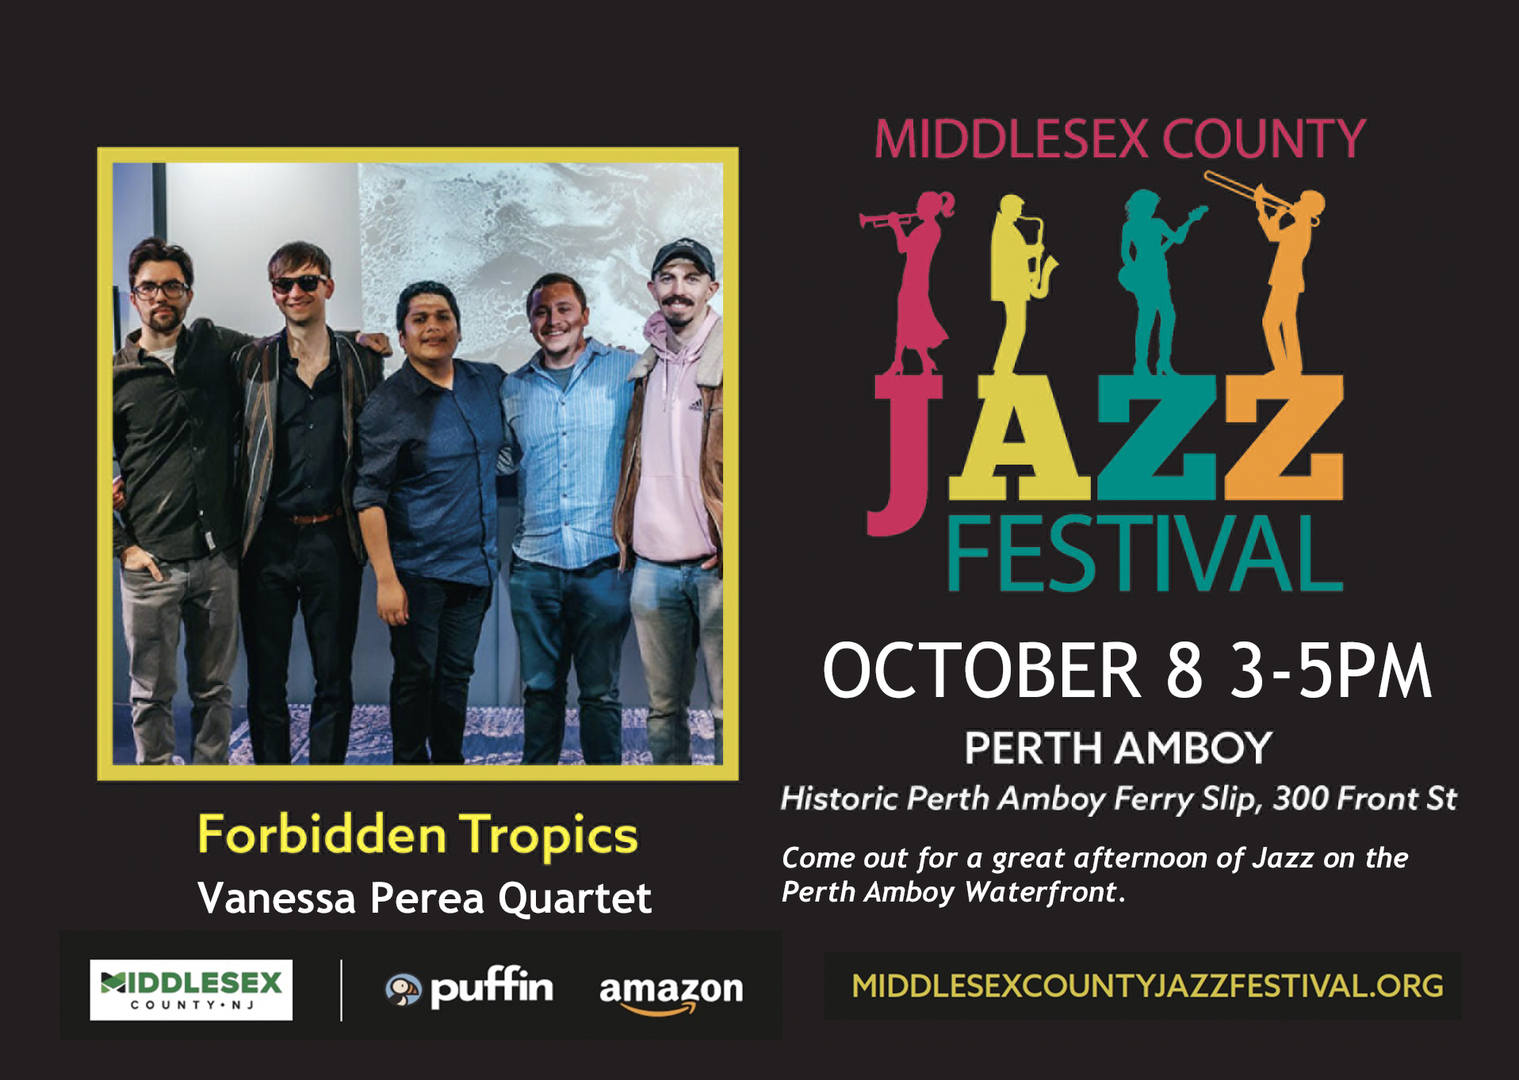 Middlesex County Jazz Festival in Perth Amboy, Perth Amboy, New Jersey, United States